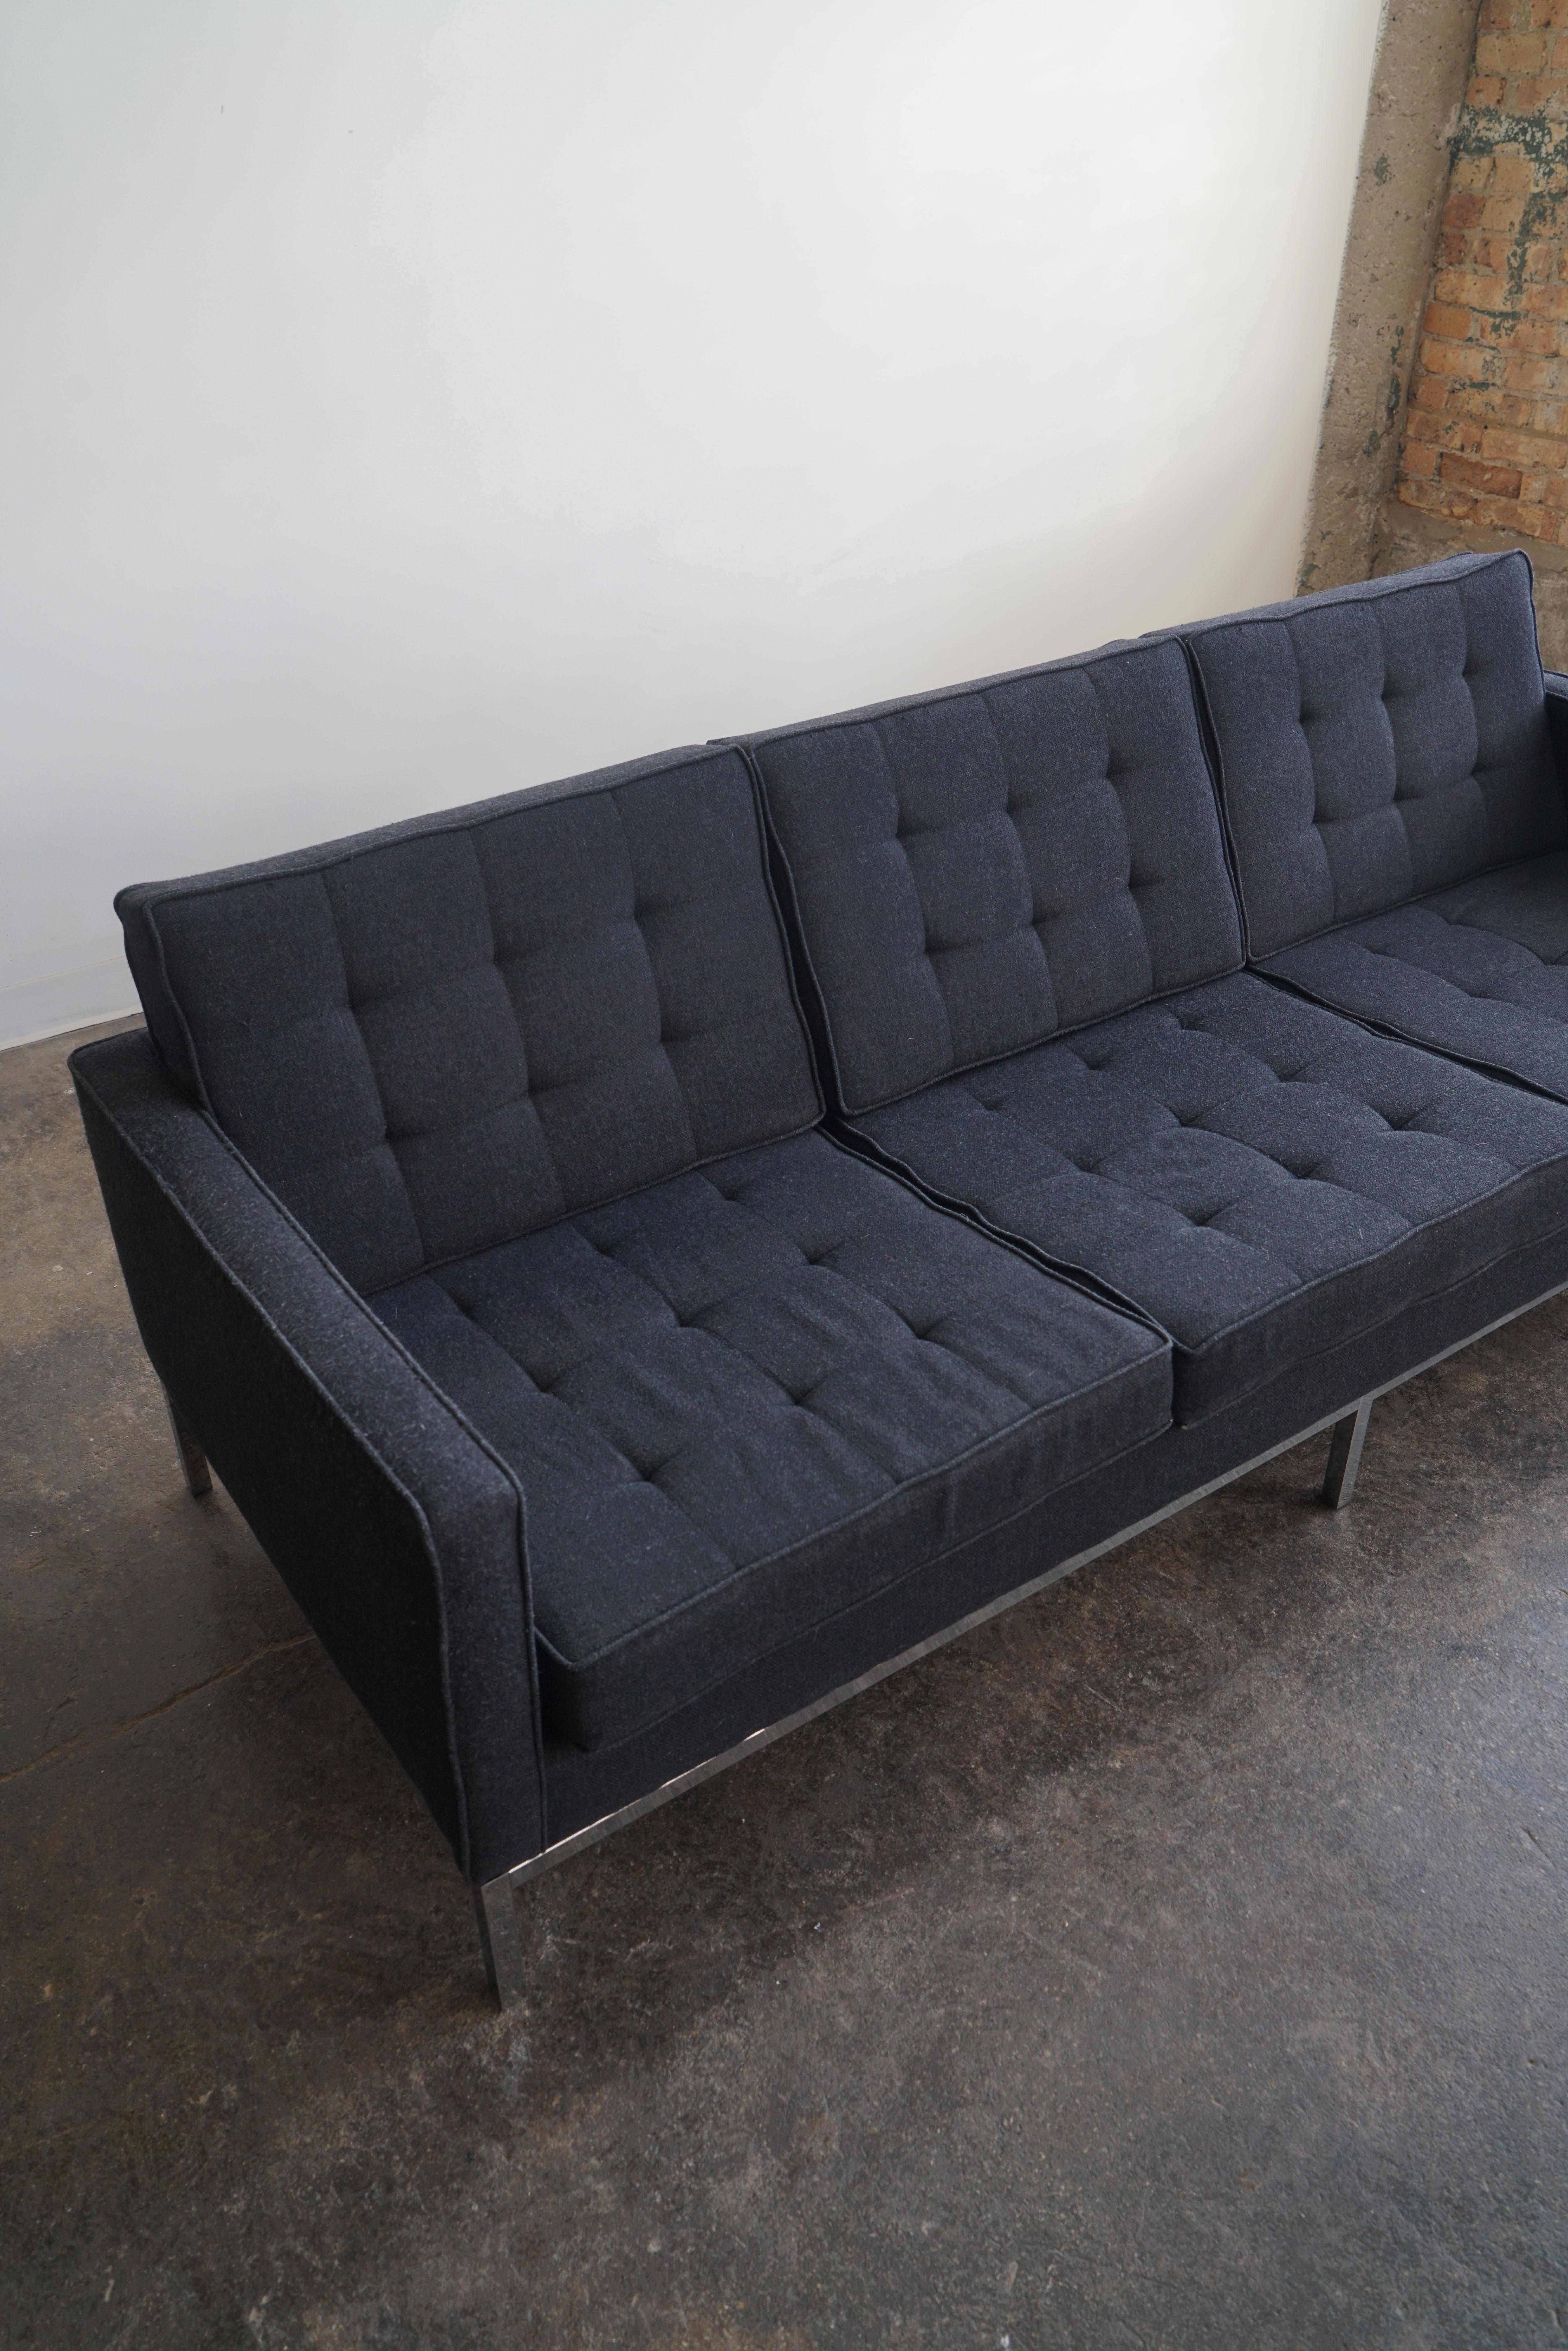 Chrome Attributed to Florence Knoll Three-Seat Mid Century Sofa in black upholstery  For Sale